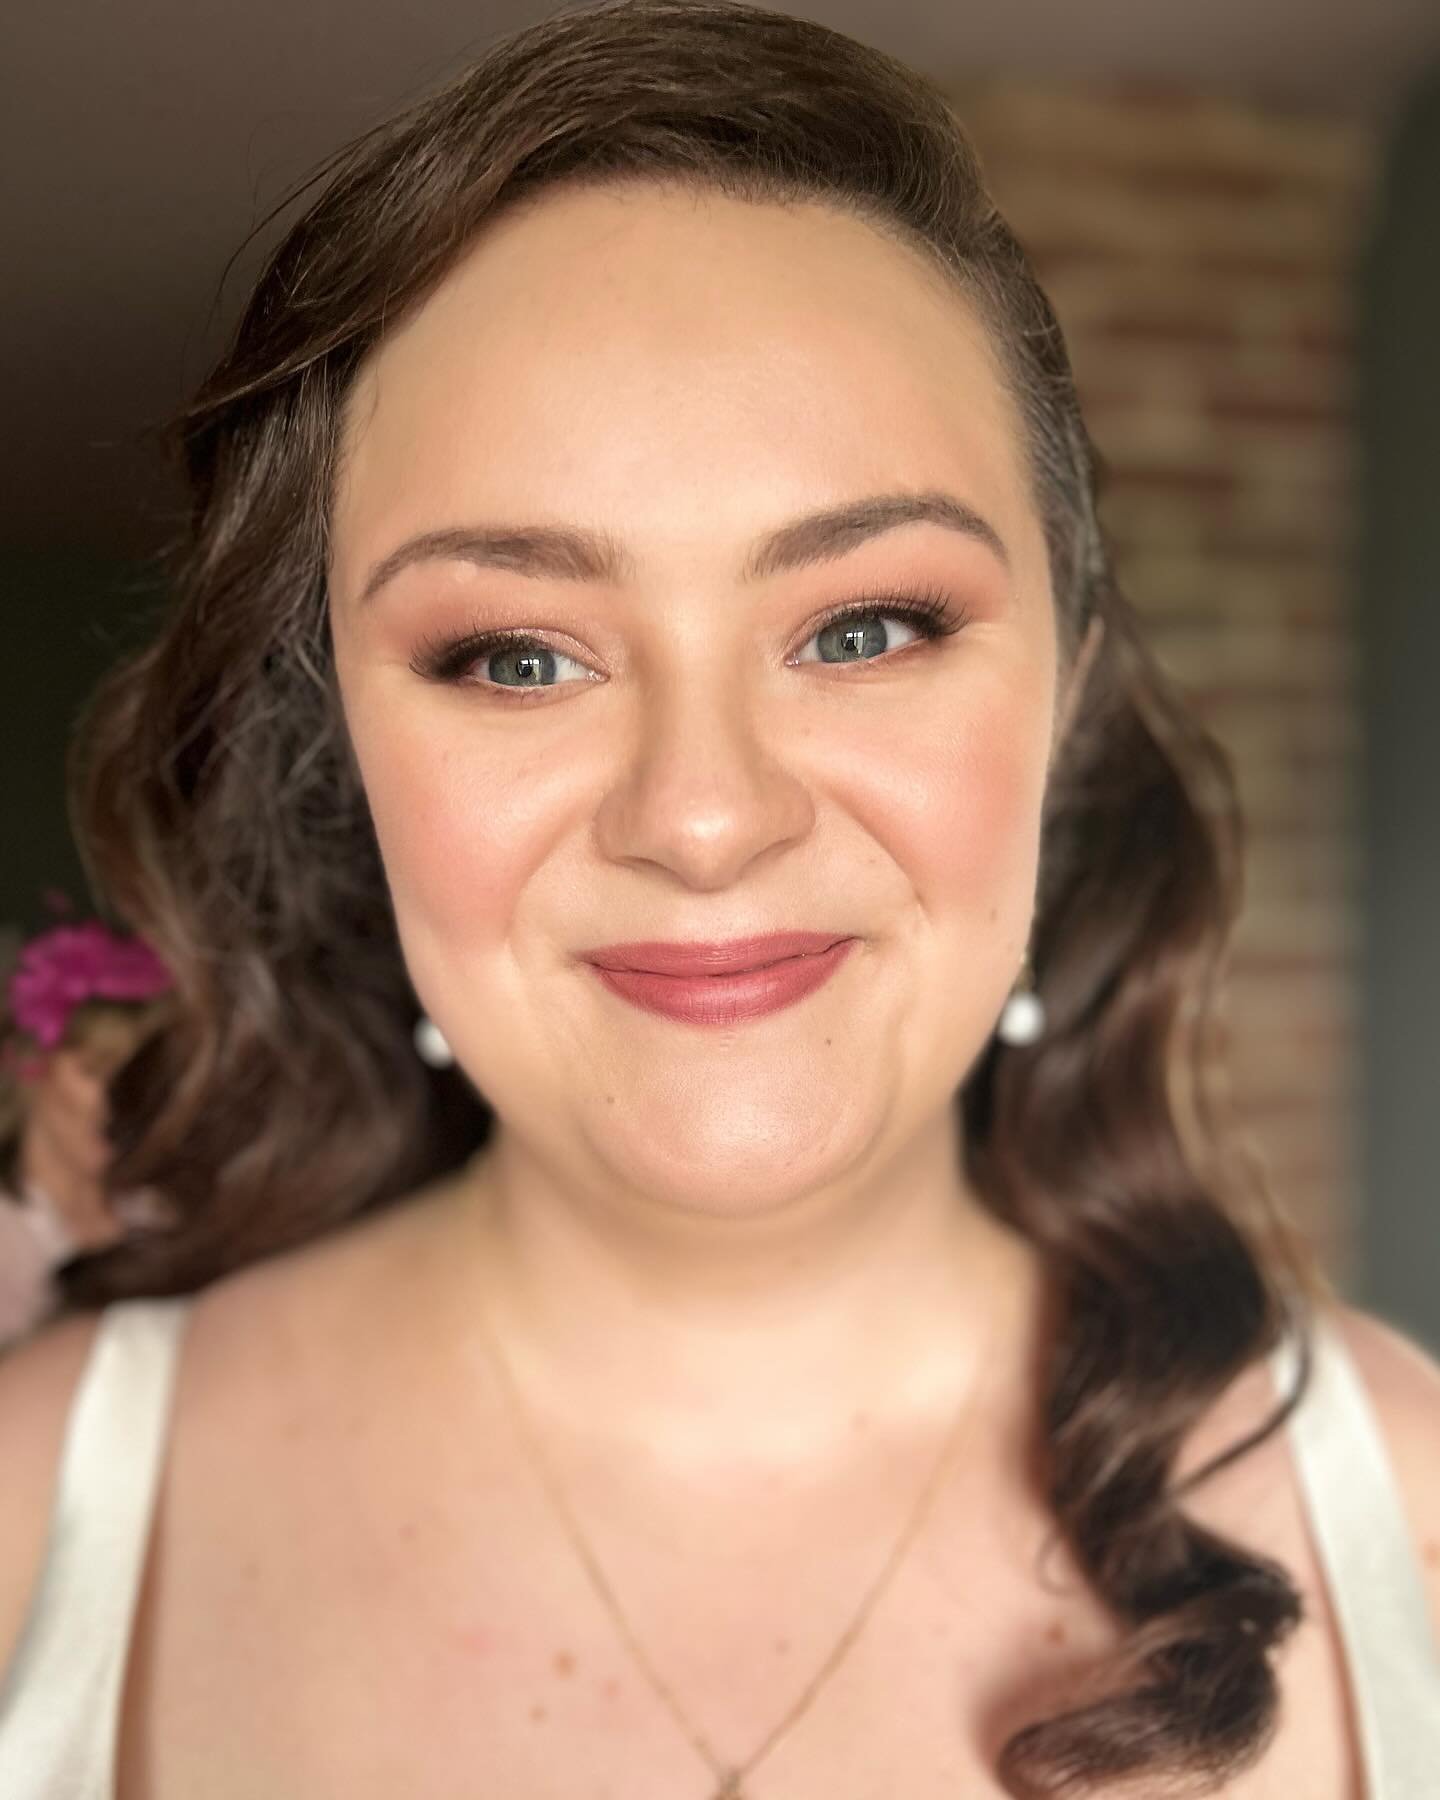 Wedding no 2 of 2024 complete!

 I&rsquo;ve had a marathon 48 hours with 13 faces painted and two hairstyles! (Not to mention a full kit clean in between) 

Today was the beautiful Melissa&rsquo;s turn @melissammas who got married to the equally gorg